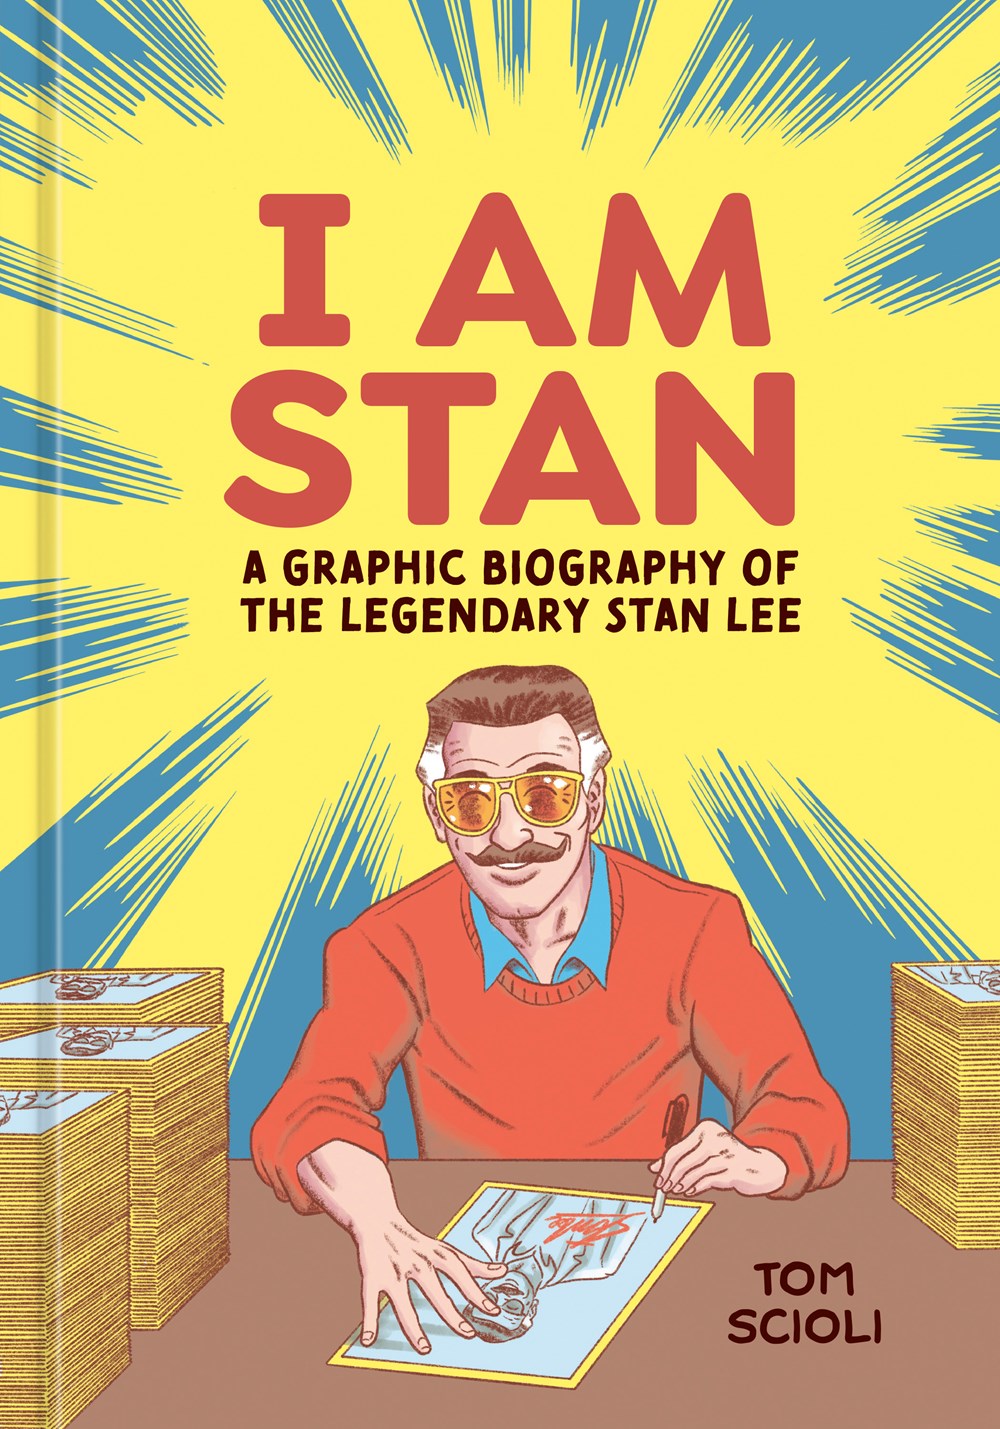 Biographies in Graphic Novel Form